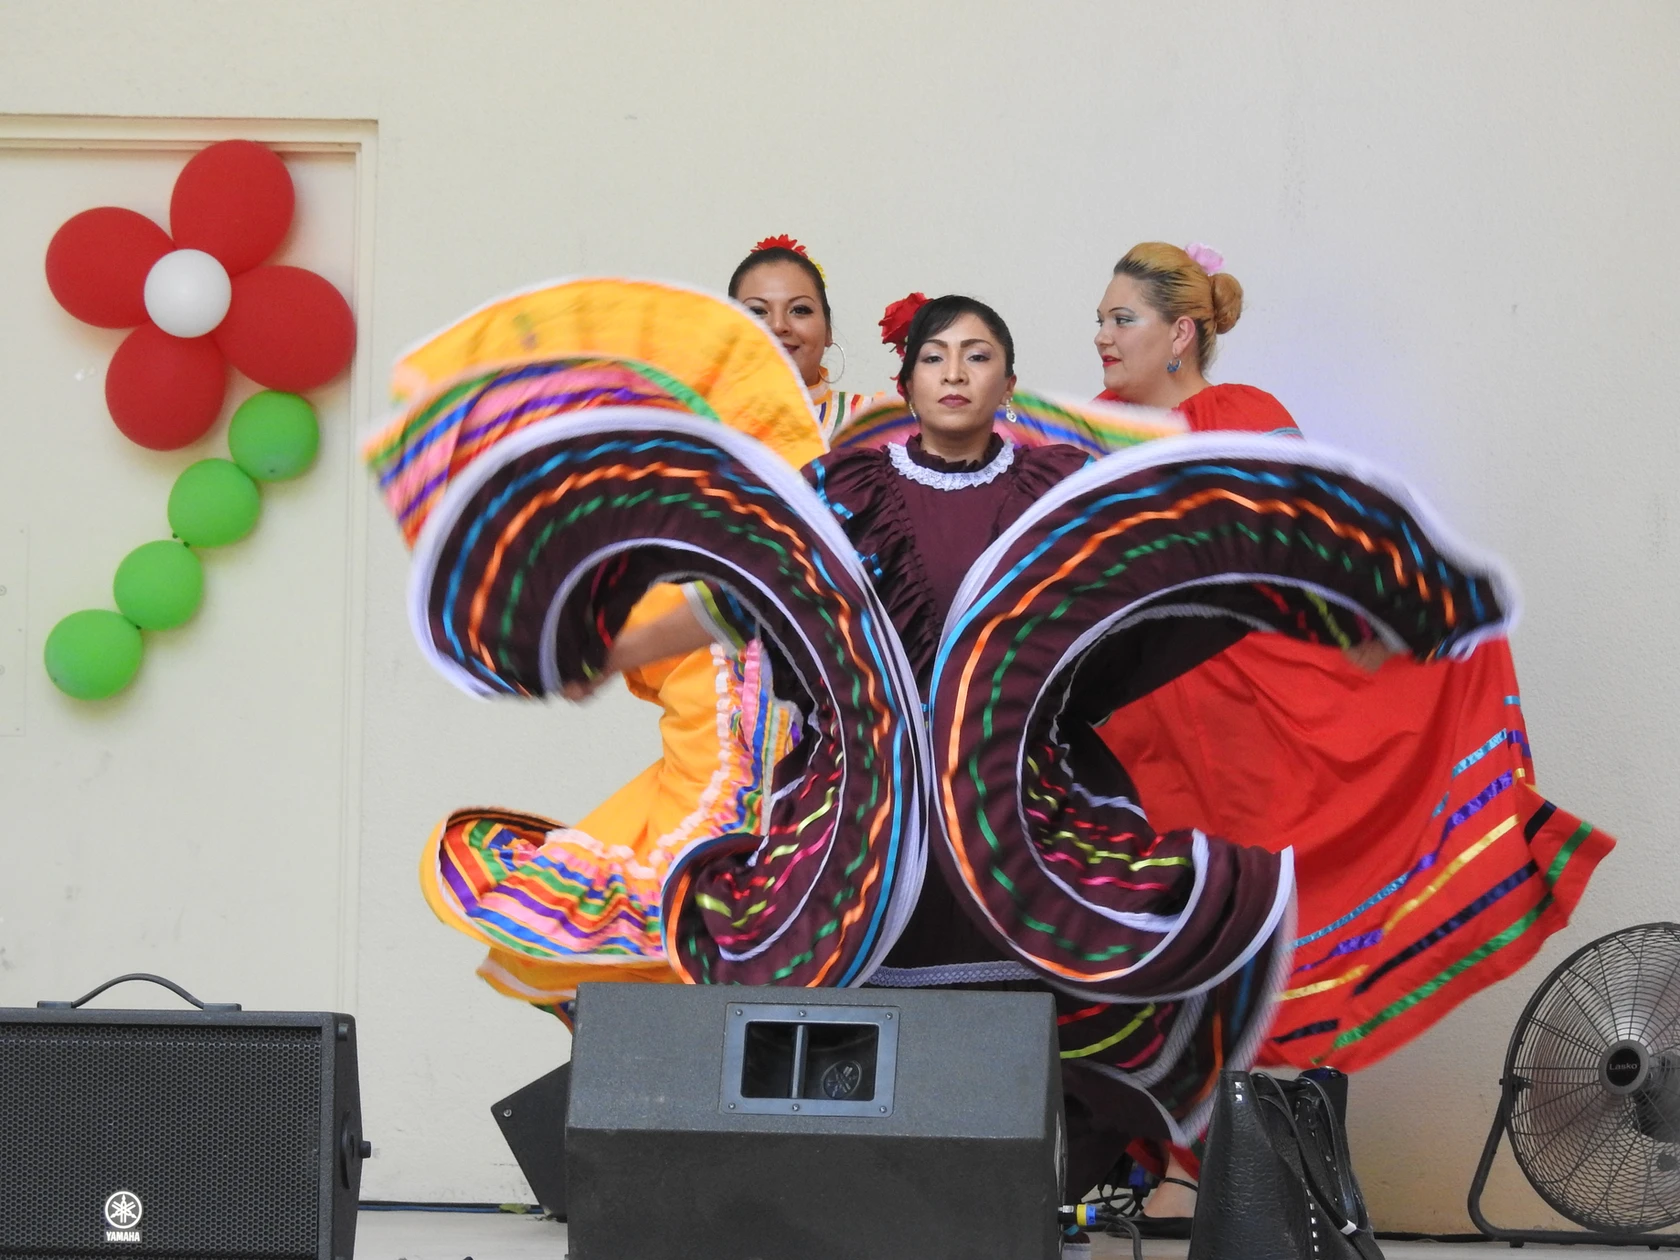 A Mexican Folklorico dancer performs on stage twirling big colorful skirts